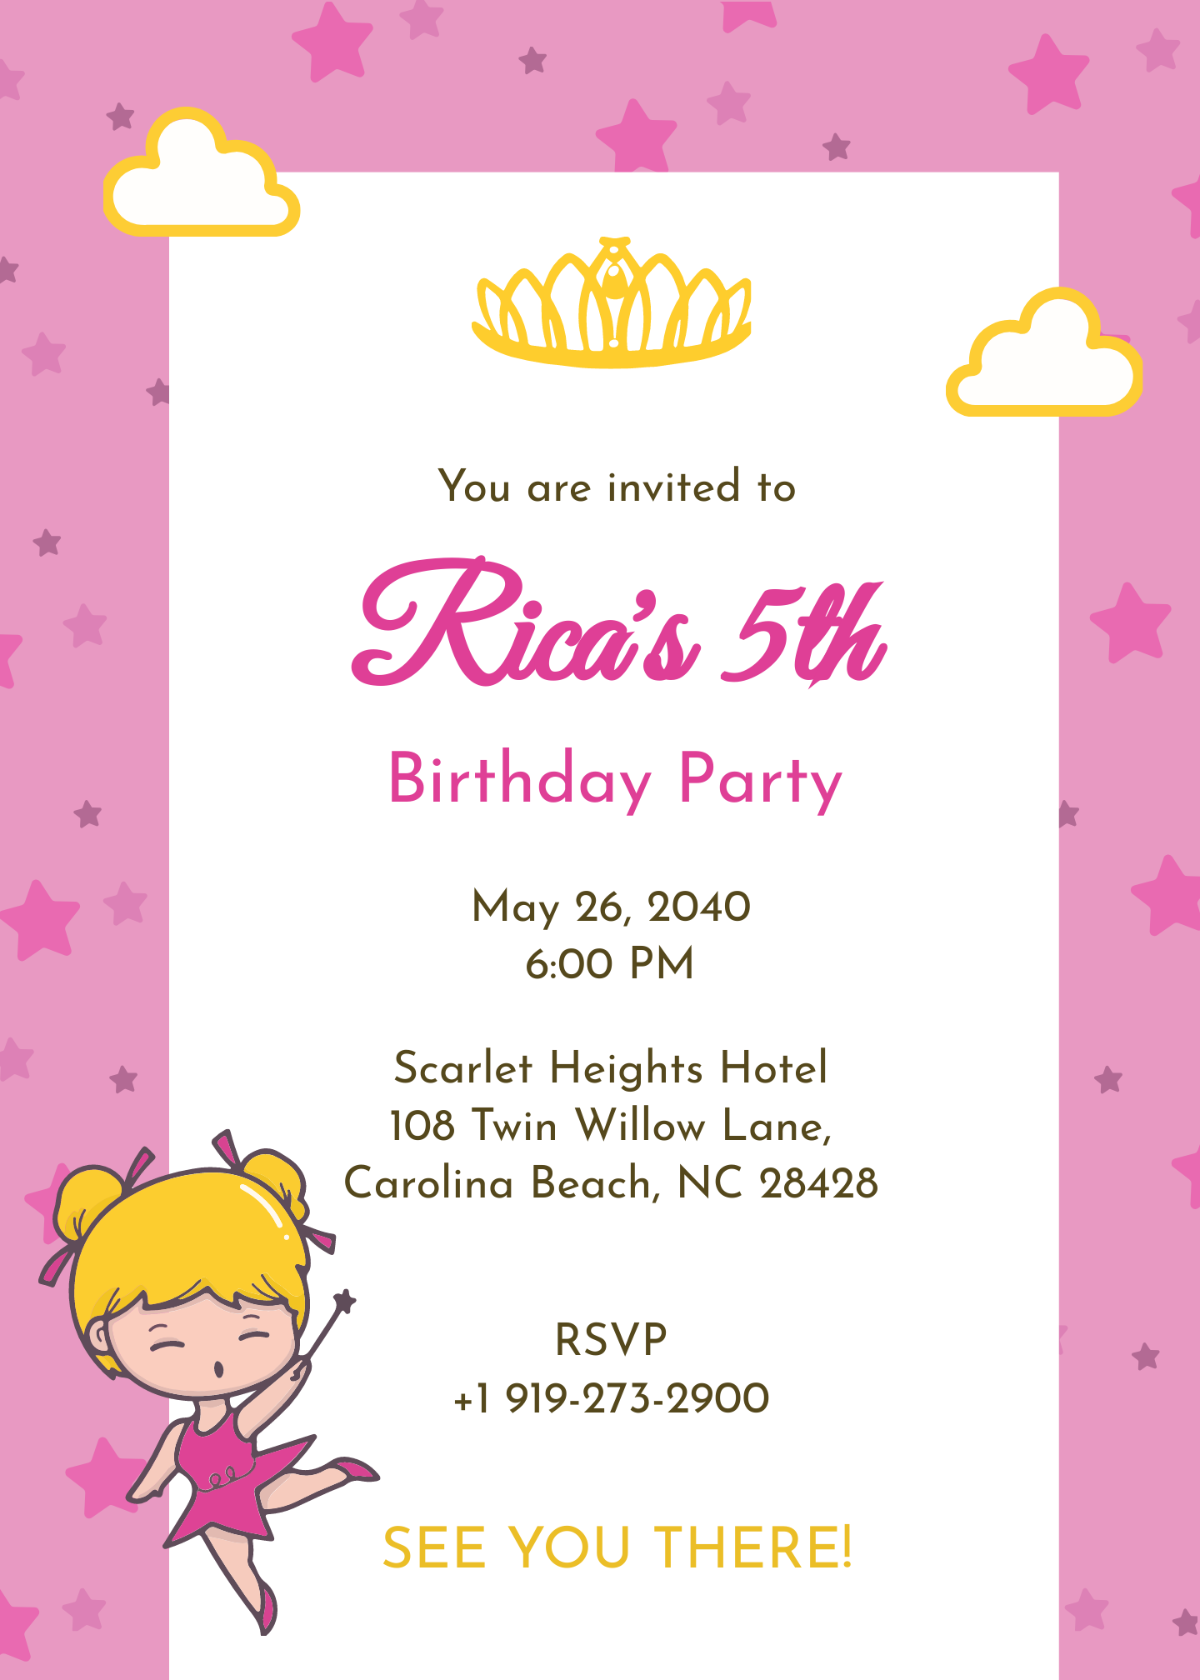 2 Sided Invitation Card Template